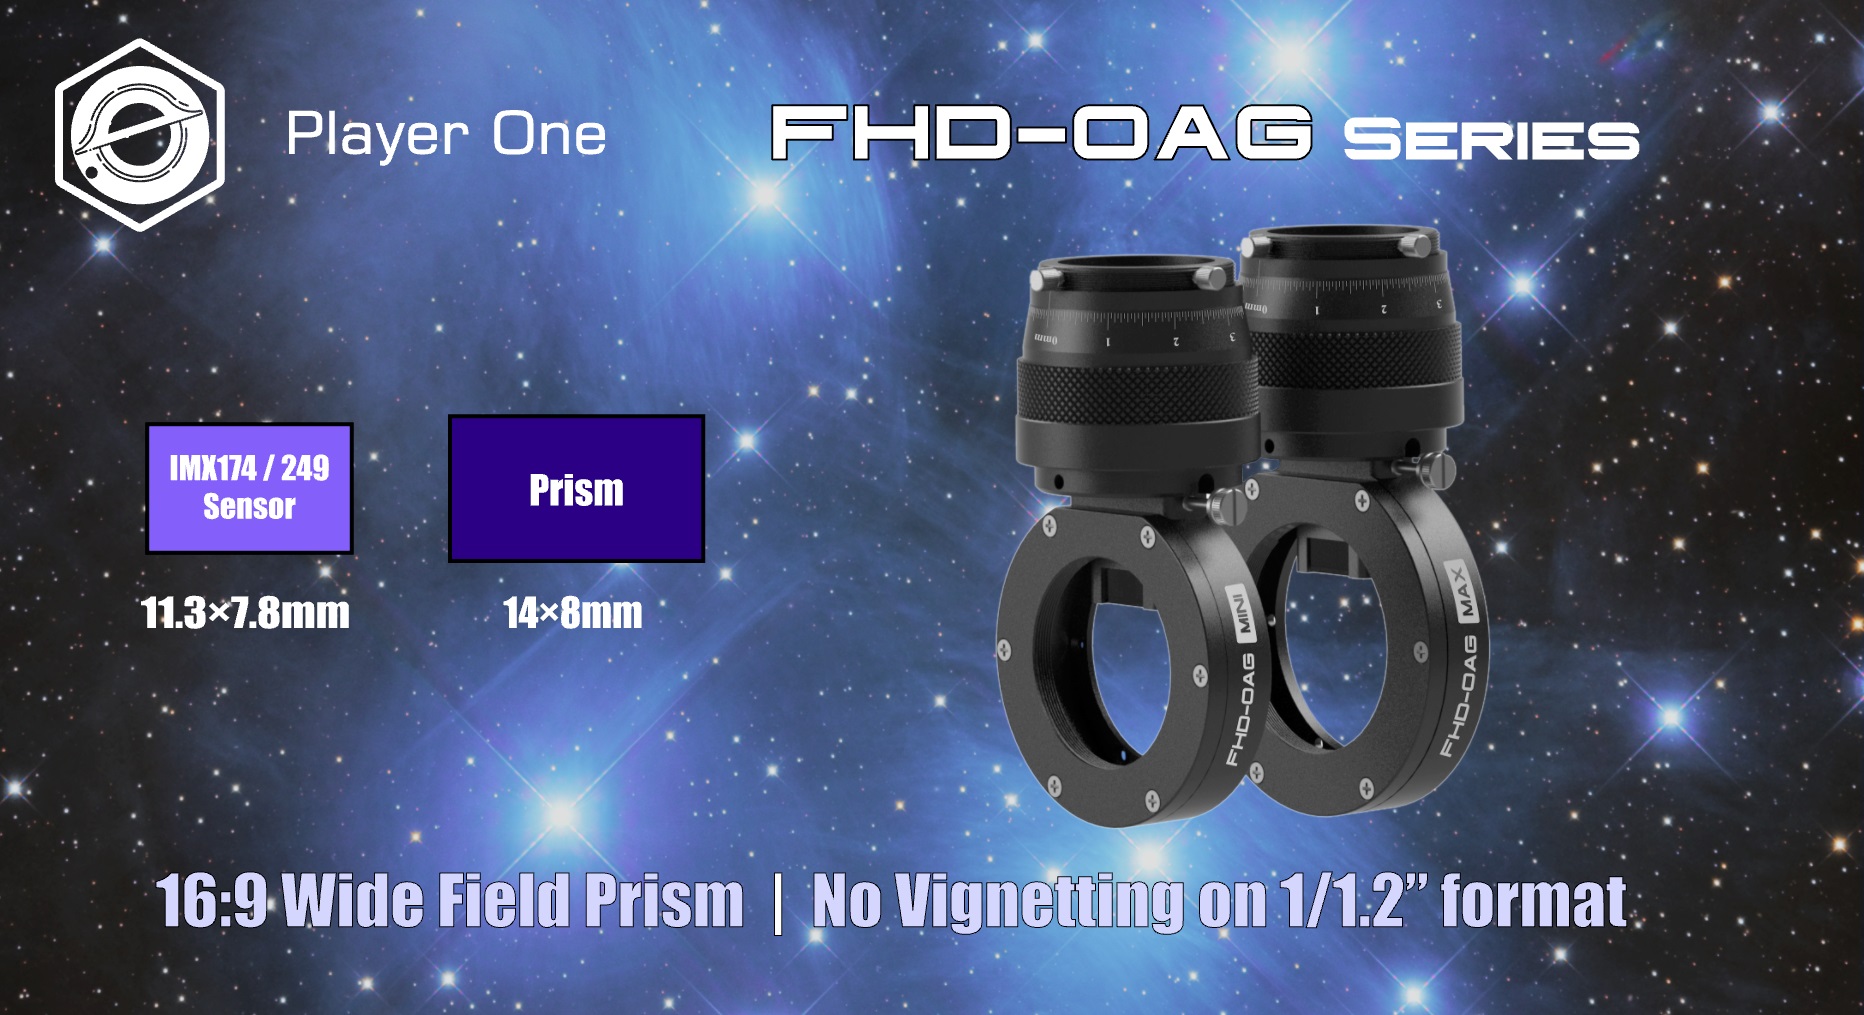  Designed for Ares Series and planetary cameras. [EN] 